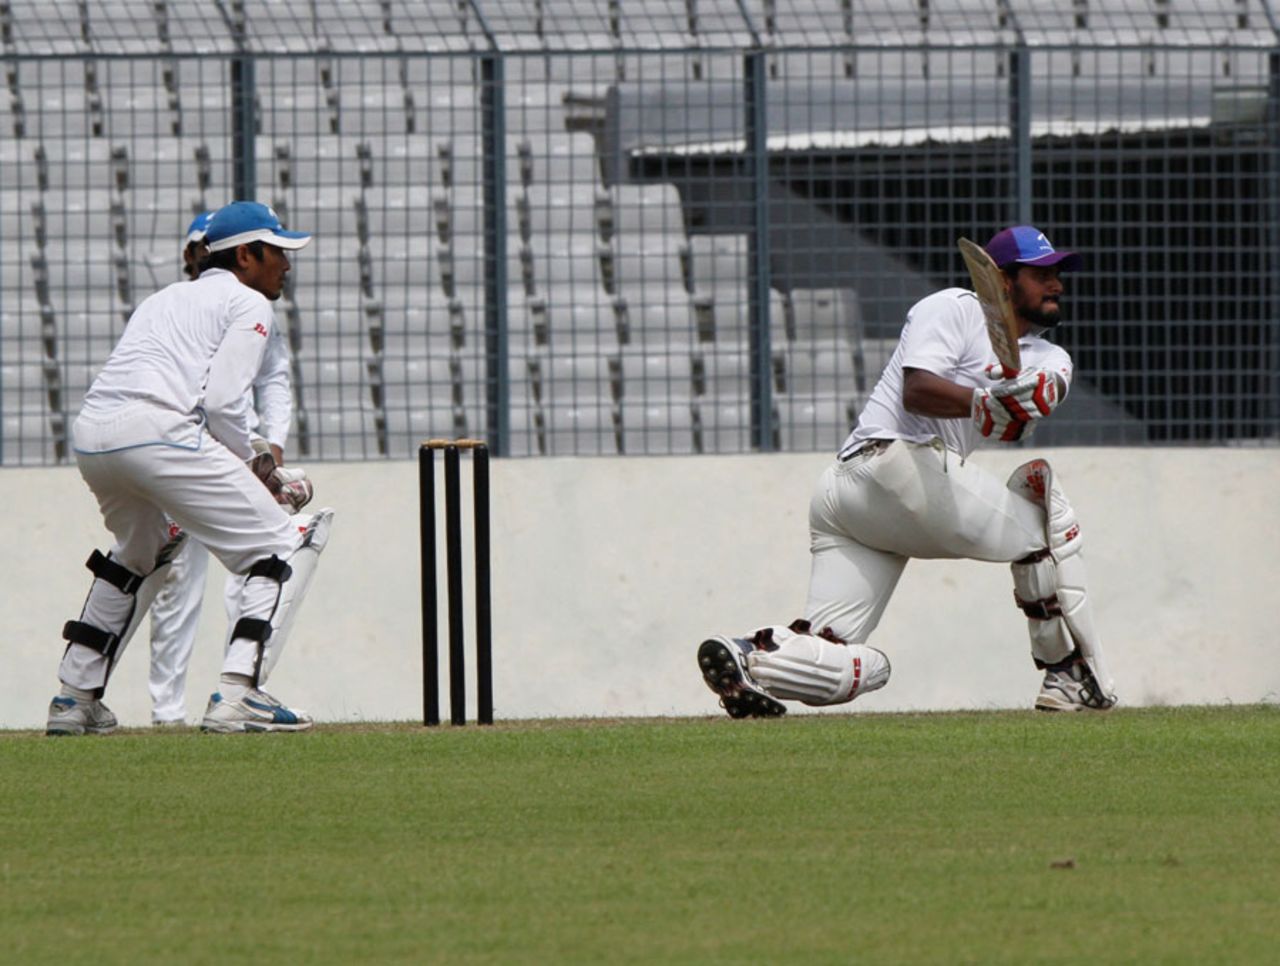 Shahriar Nafees sweeps during a warm-up game, Mirpur, July 17, 2011